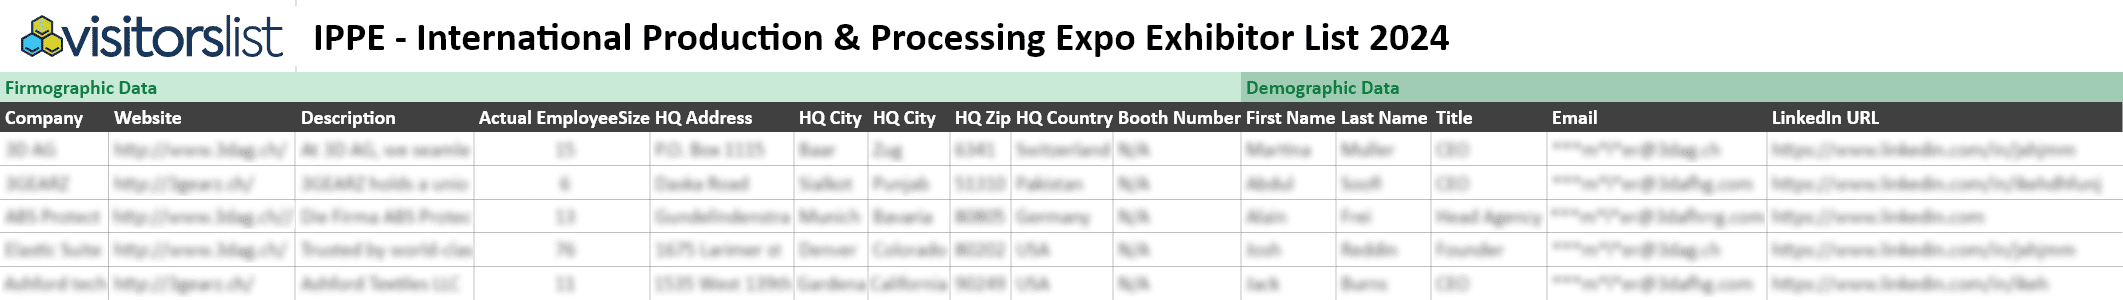 IPPE - International Production & Processing Expo Exhibitor List 2024